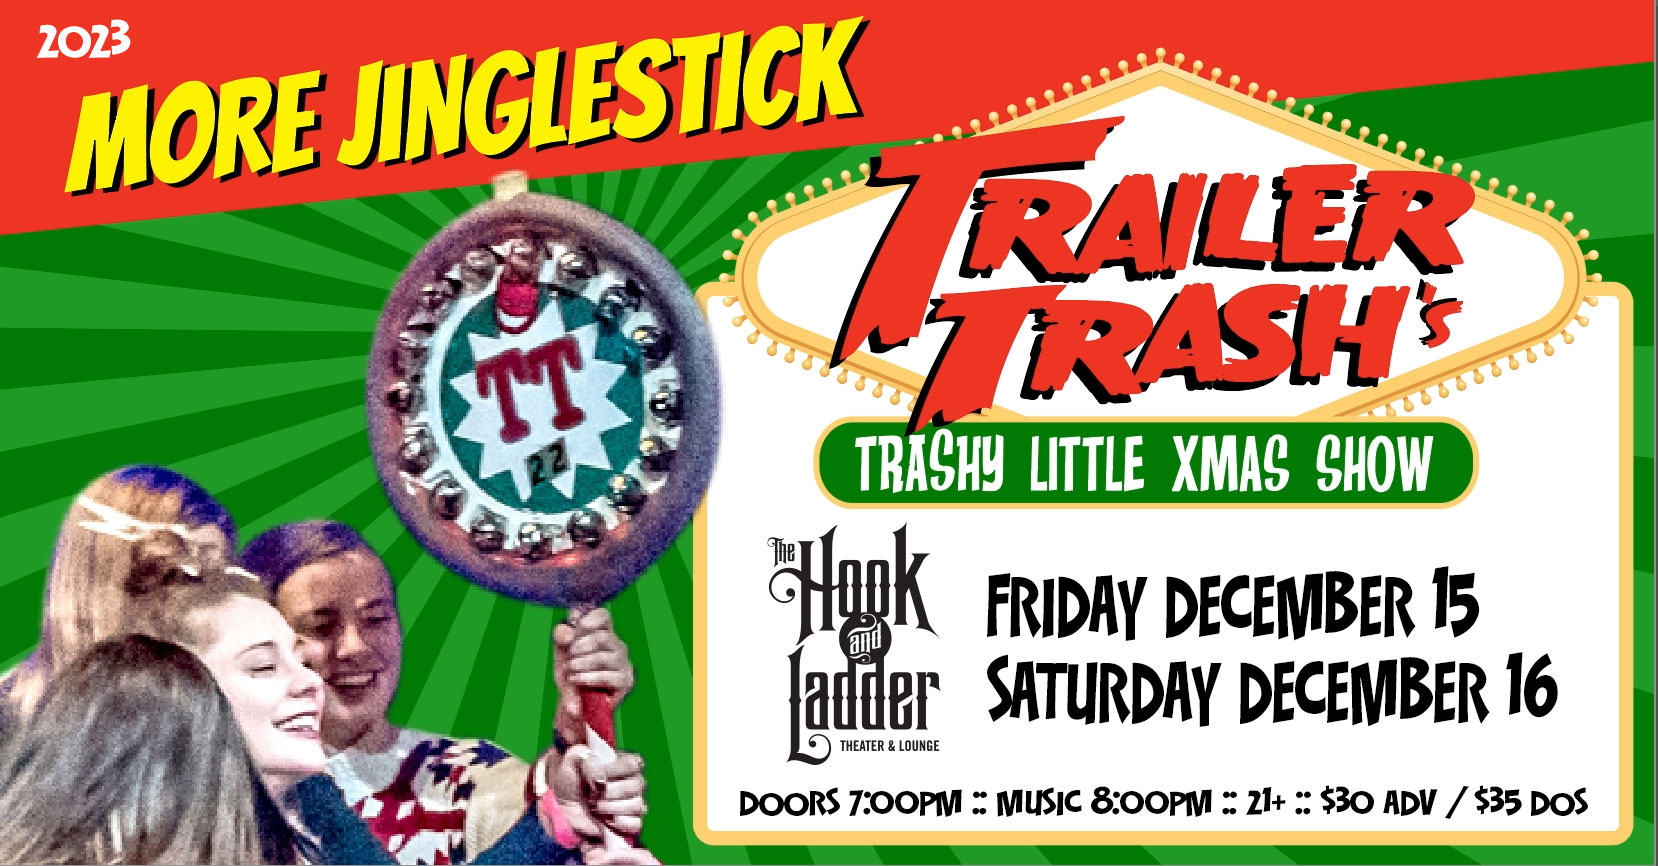 Trailer Trash's Trashy Little Xmas Show “More Jingle Stick!” Friday, December 15, 2023 Saturday, December 16, 2023 Doors 7:00pm :: Music 8:00pm :: 21+ Tickets: $30 Advance / $35 Day of Show